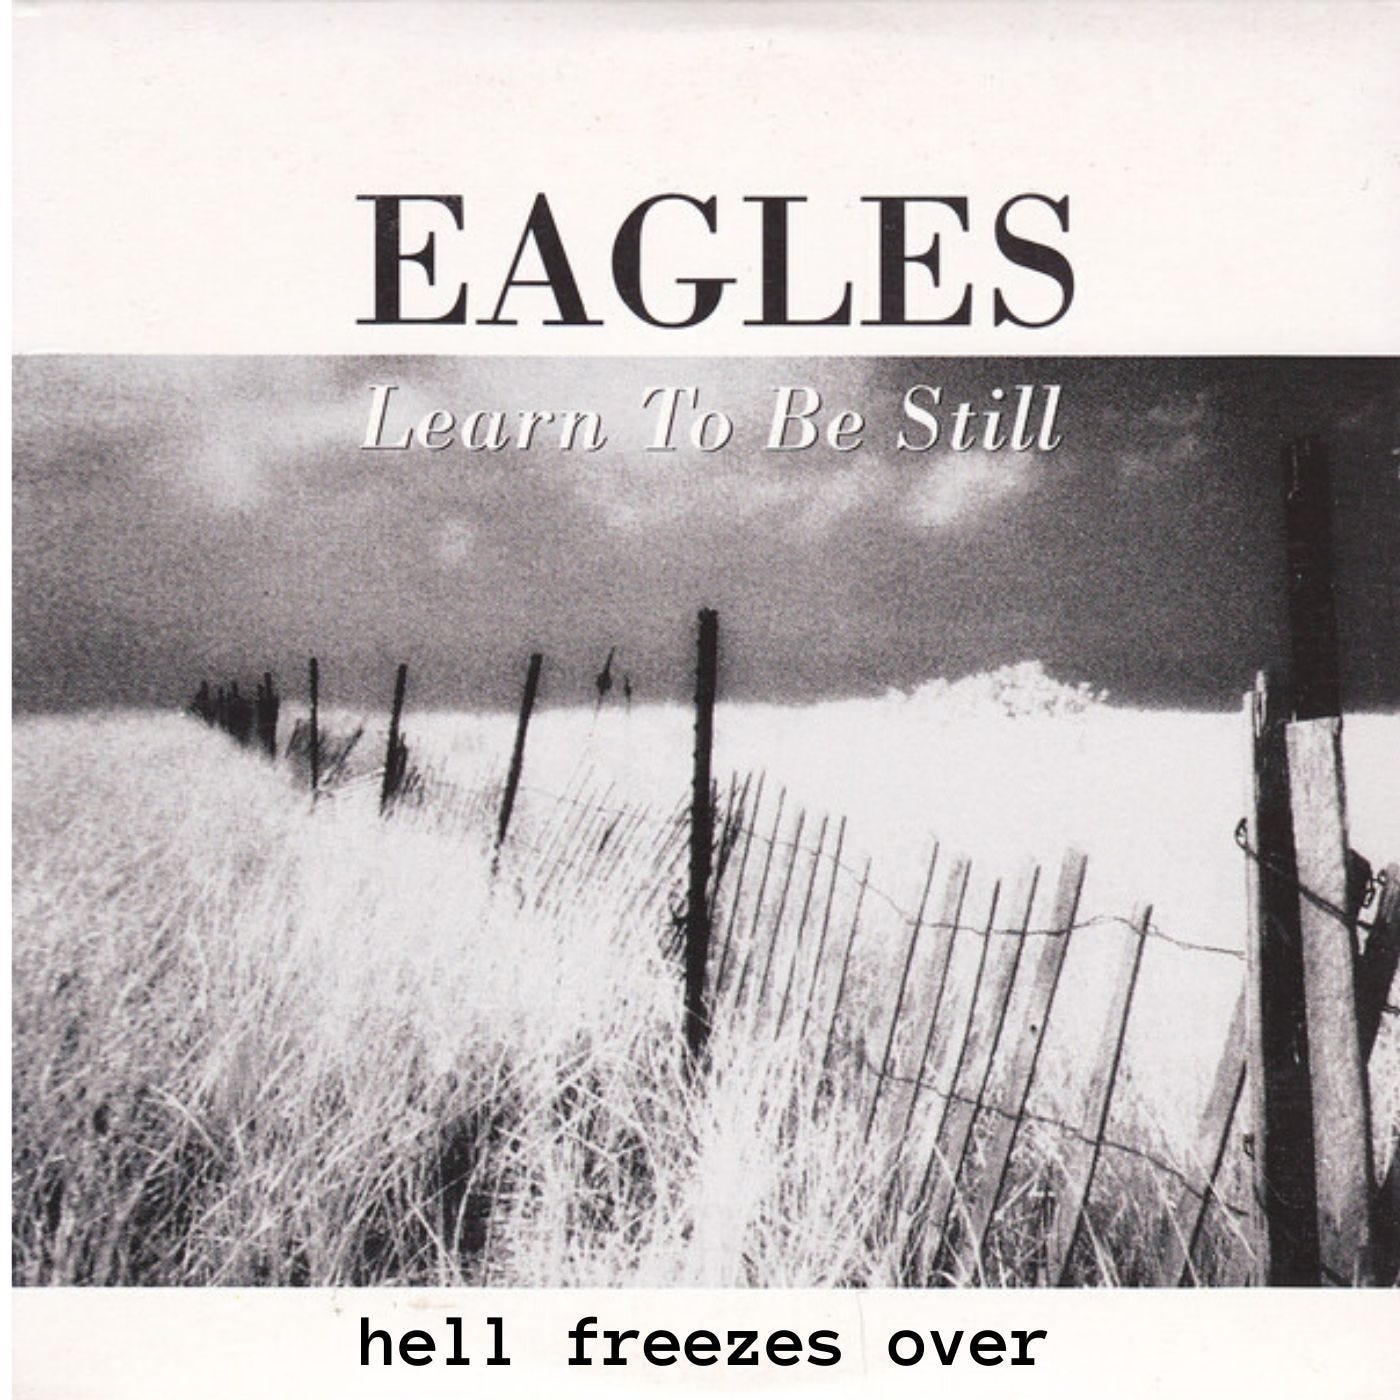 Don Henley and The Eagles doing what was a new song in 1994…”Get